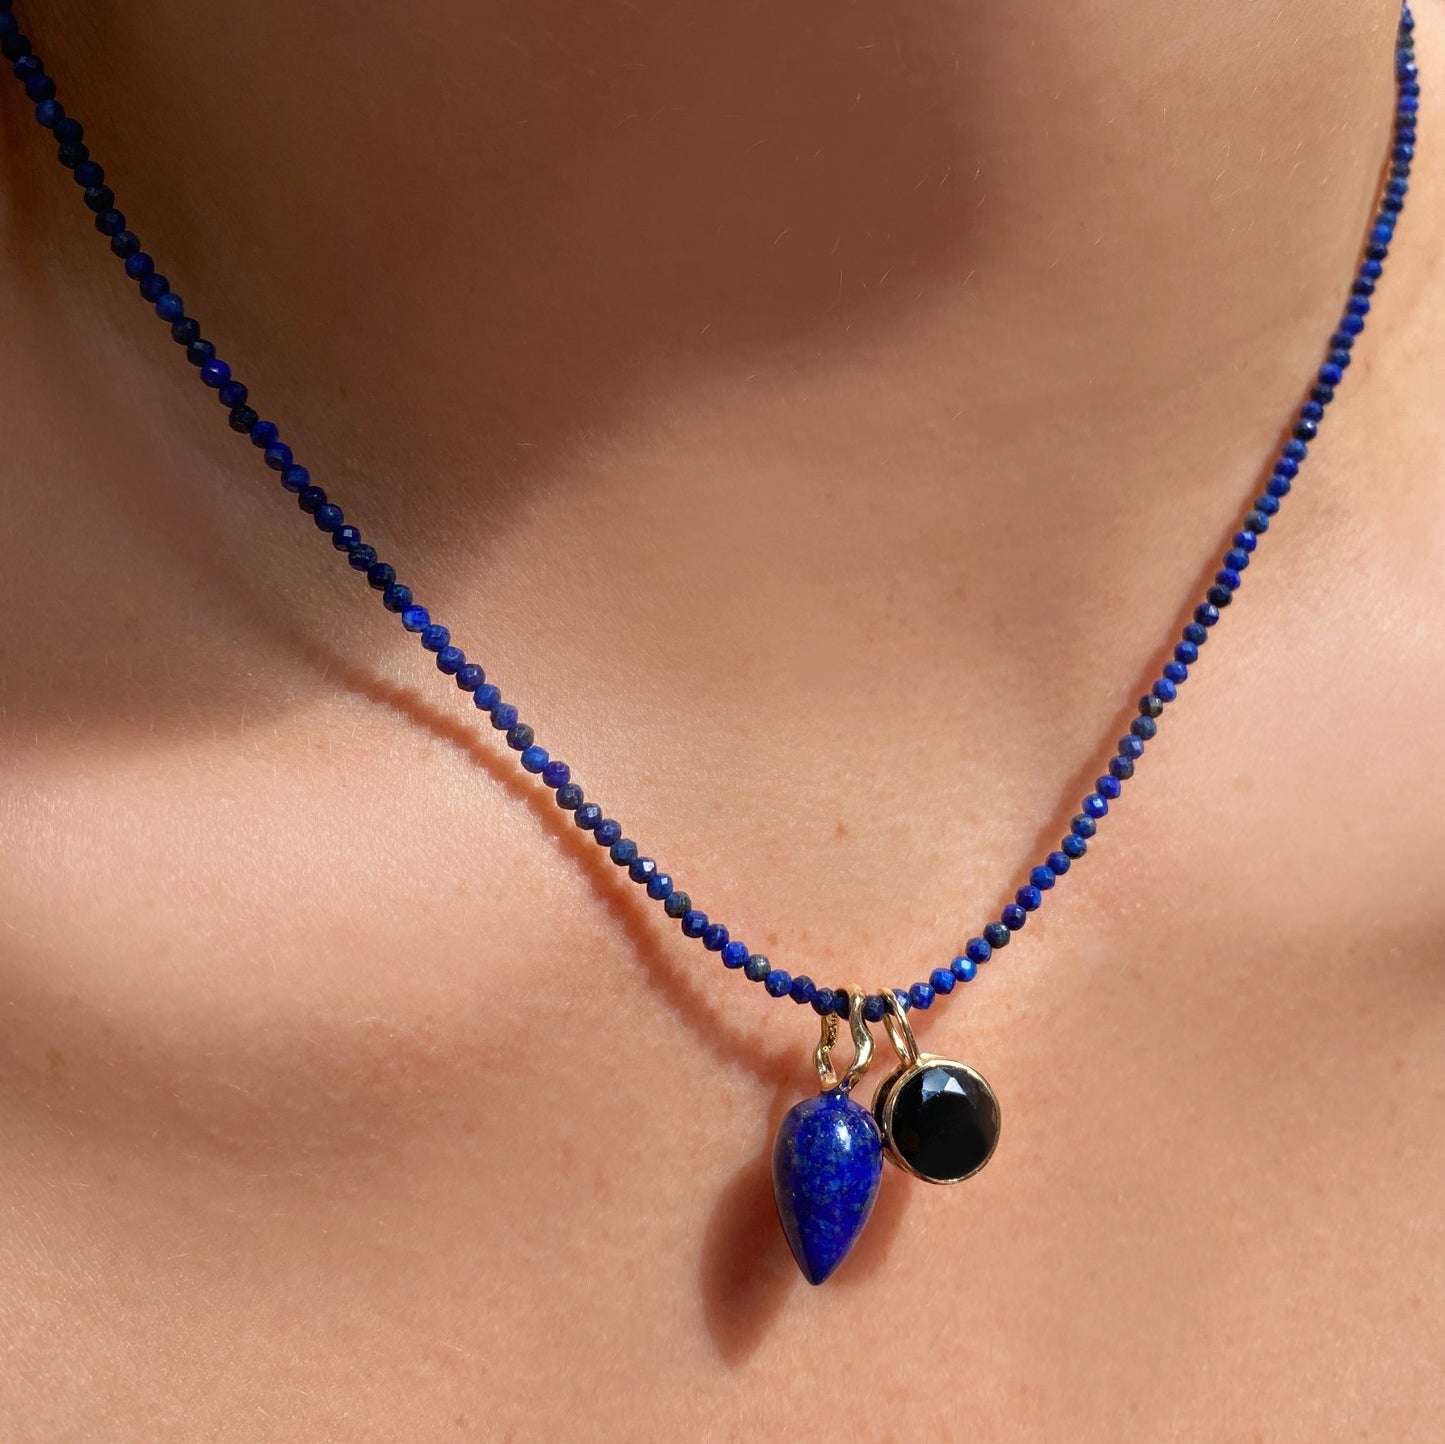 14k gold Onyx Round Solitaire Charm. Styled on a neck with an acorn charm hanging from a beaded necklace. 